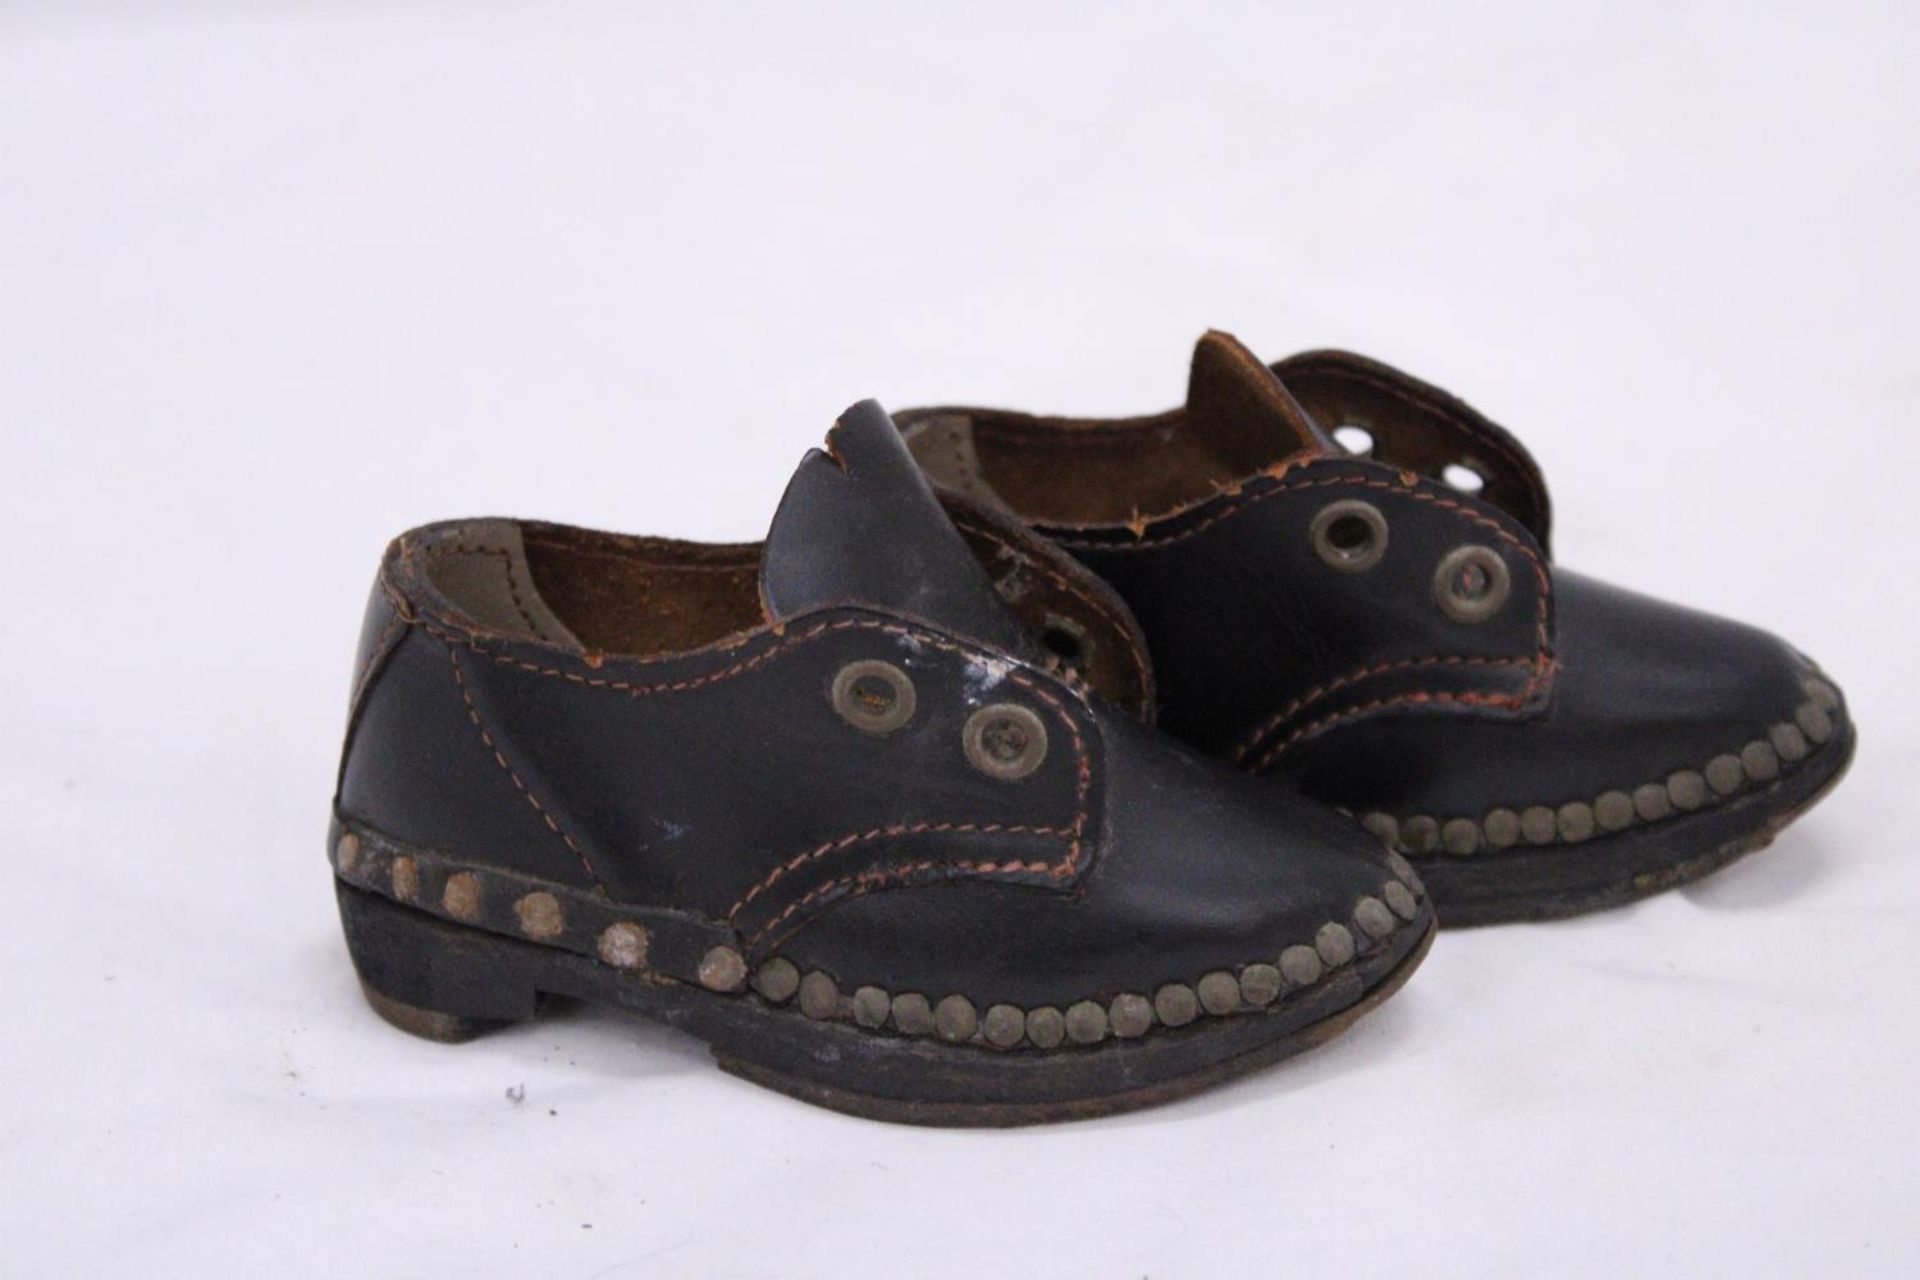 A PAIR OF VICTORIAN STYLE LEATHER (HANDMADE) CHILDREN'S SHOES - Image 2 of 5